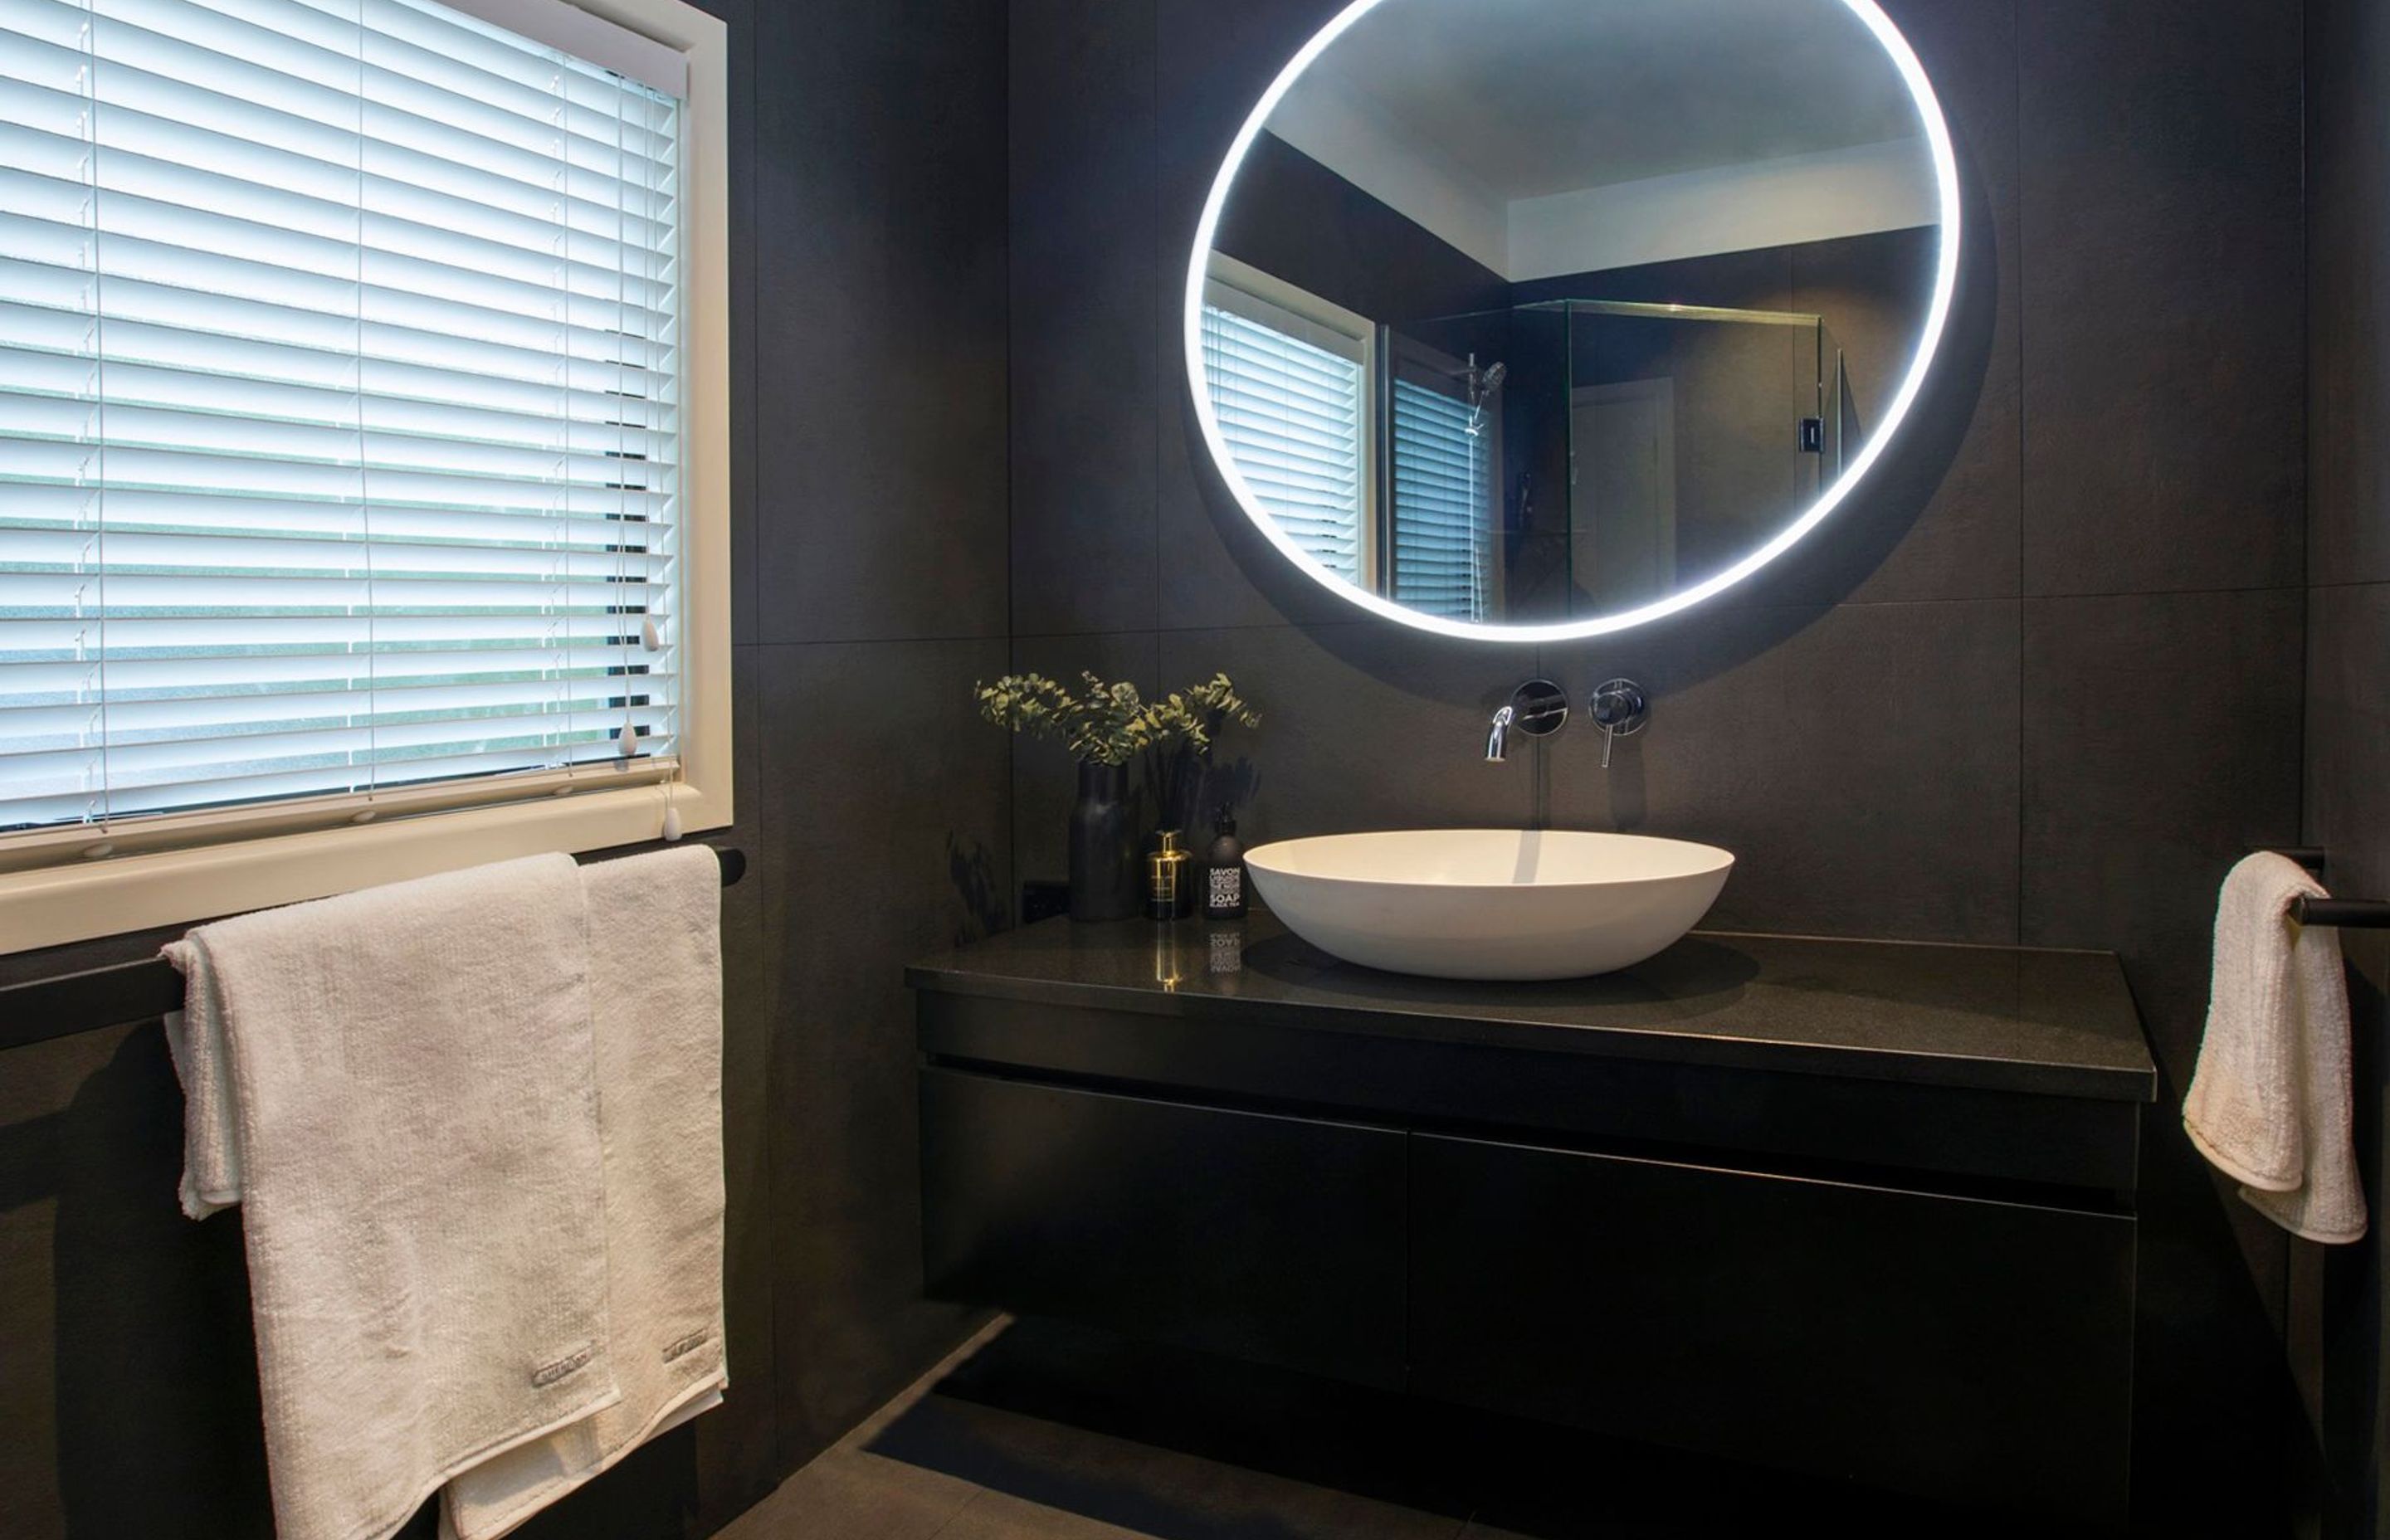 This client also undertook their powder room renovation with us, we flipped the contrast on this space and created a moody atmosphere with the dark tiles and  white accessories to compliment the LED mirror beautifully. The wall-mounted tapware in this van